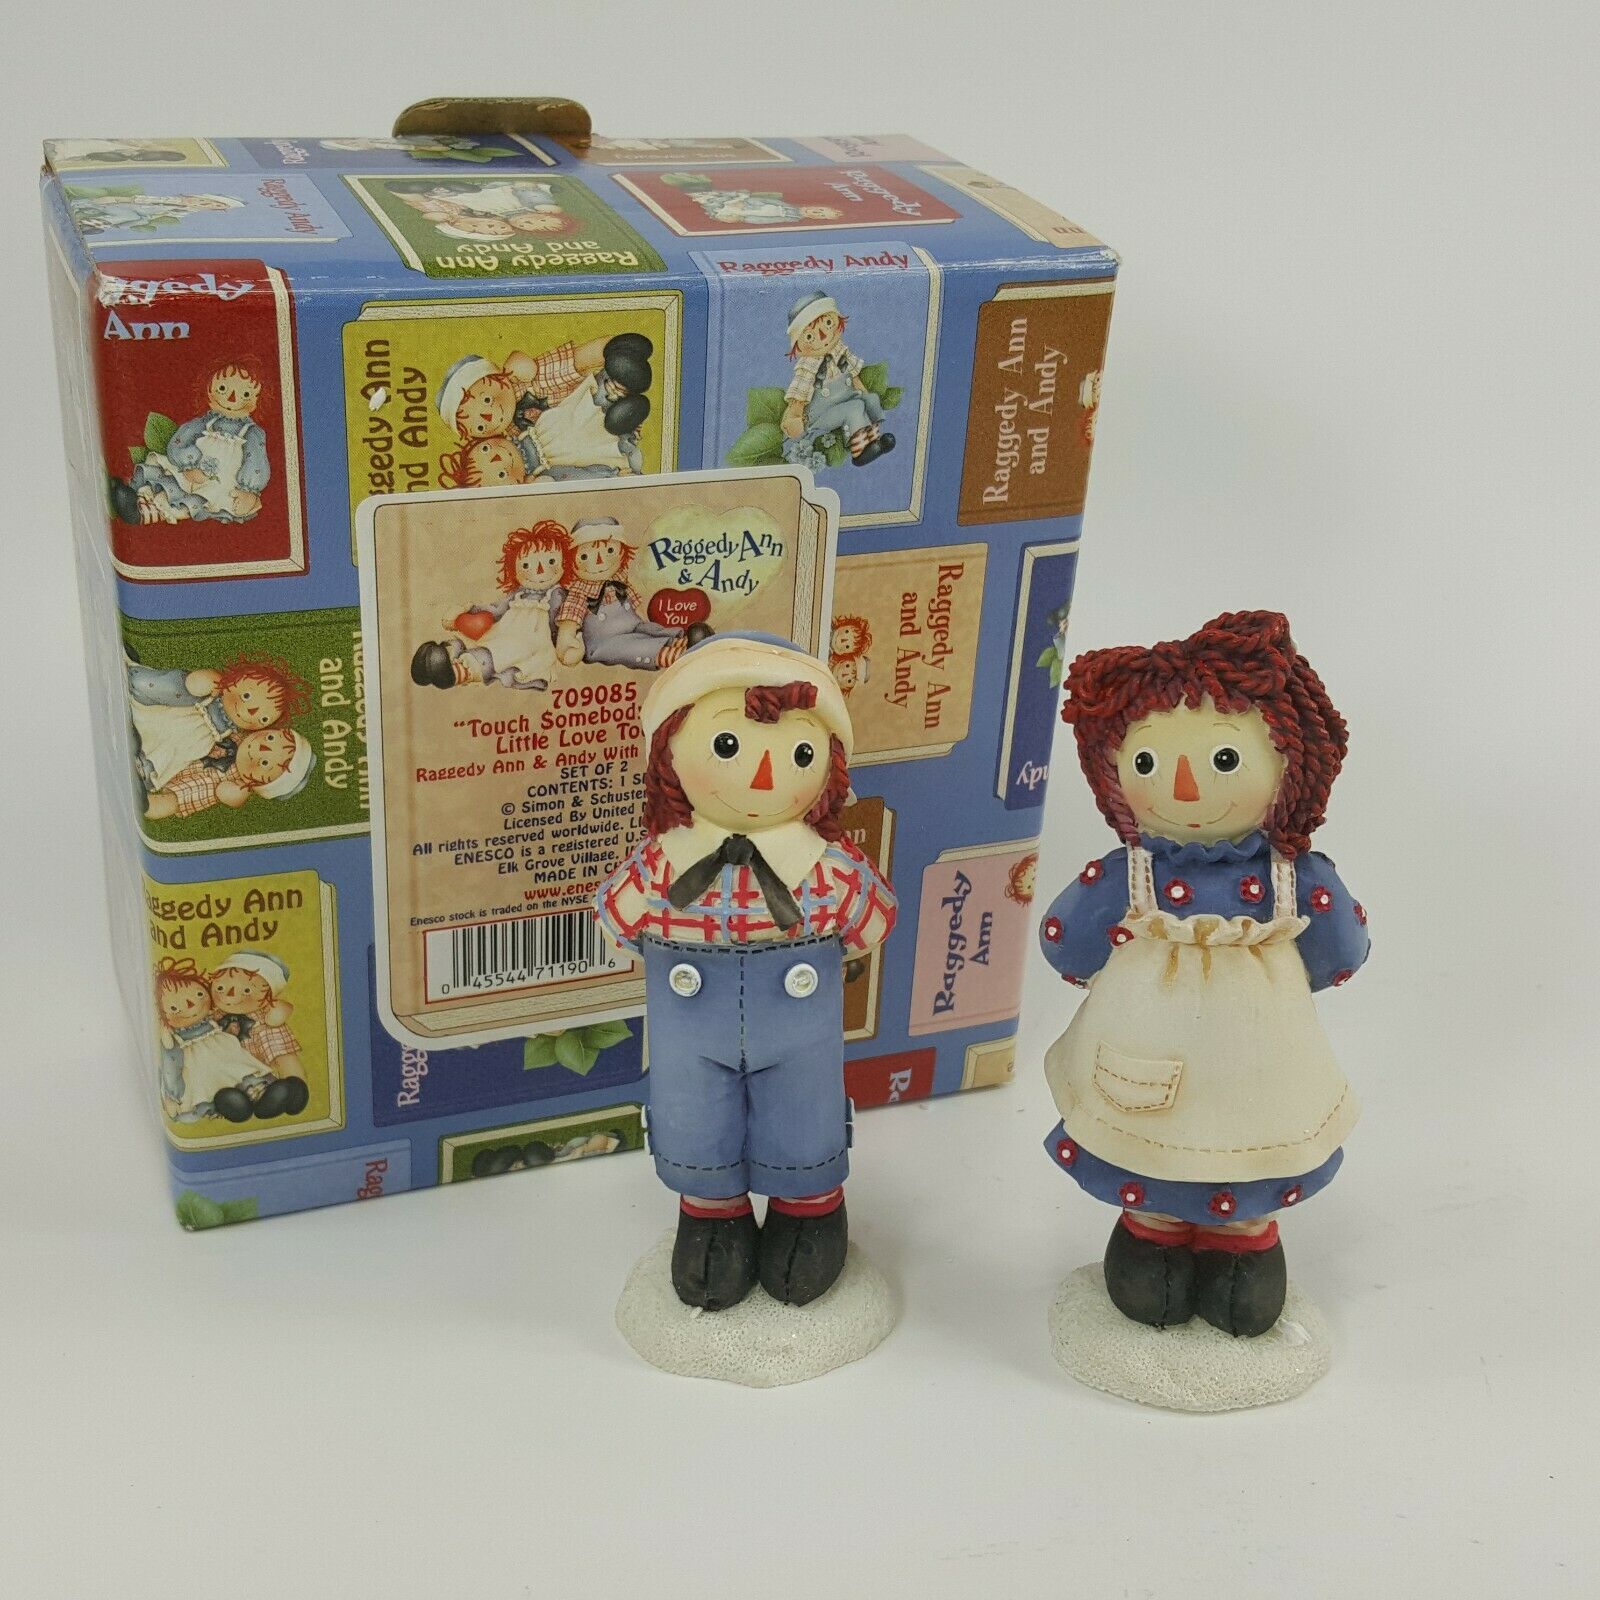 Primary image for Raggedy Ann & Andy Touch Somebody w/ Love Today Figures Enesco 709085 PDH1T